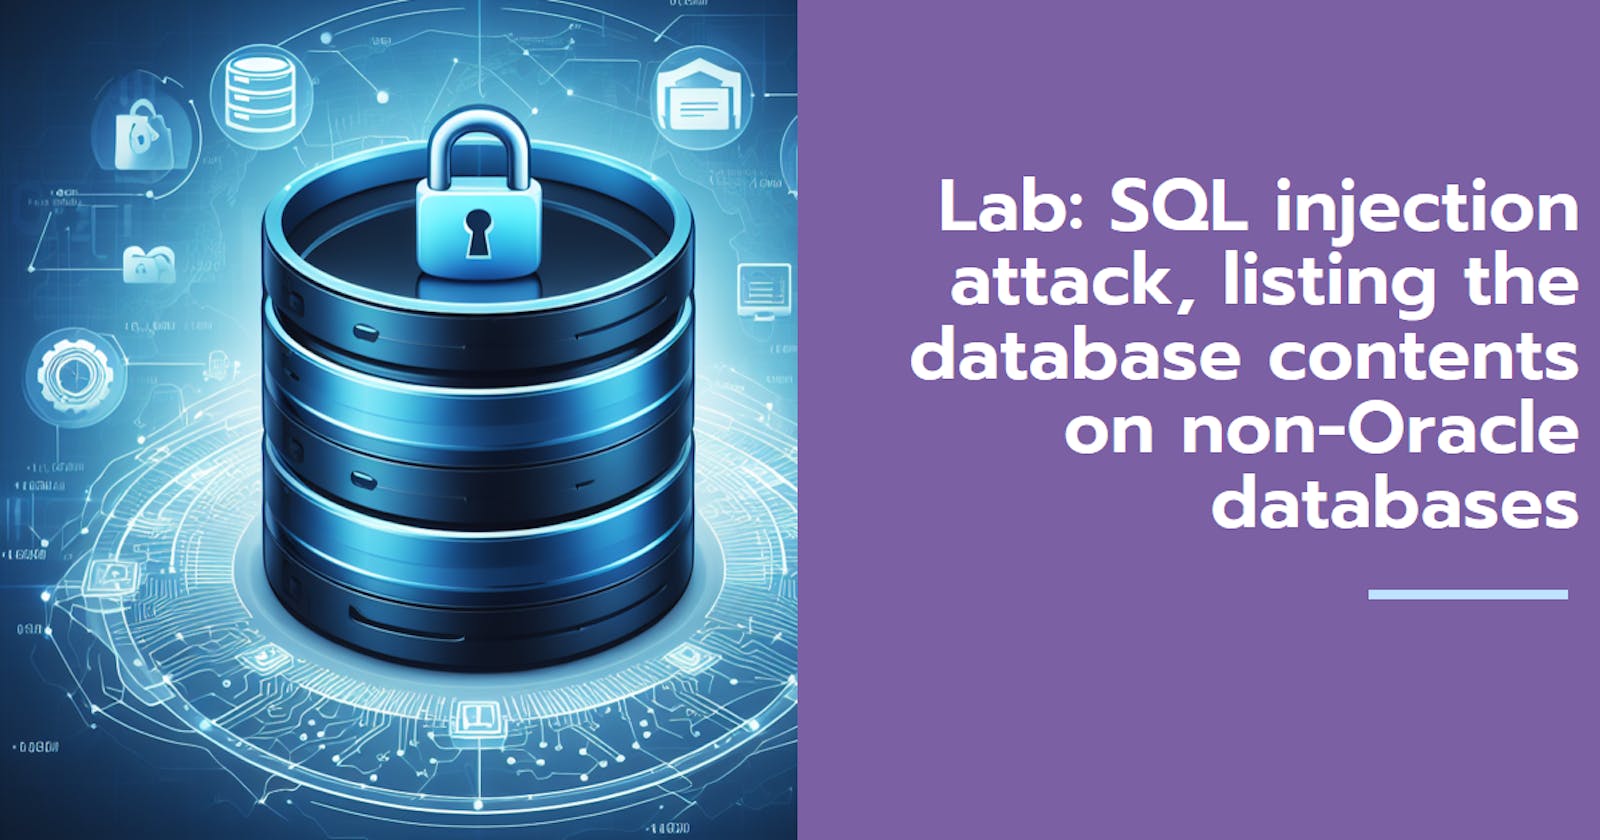 Lab: SQL injection attack, listing the database contents on non-Oracle databases